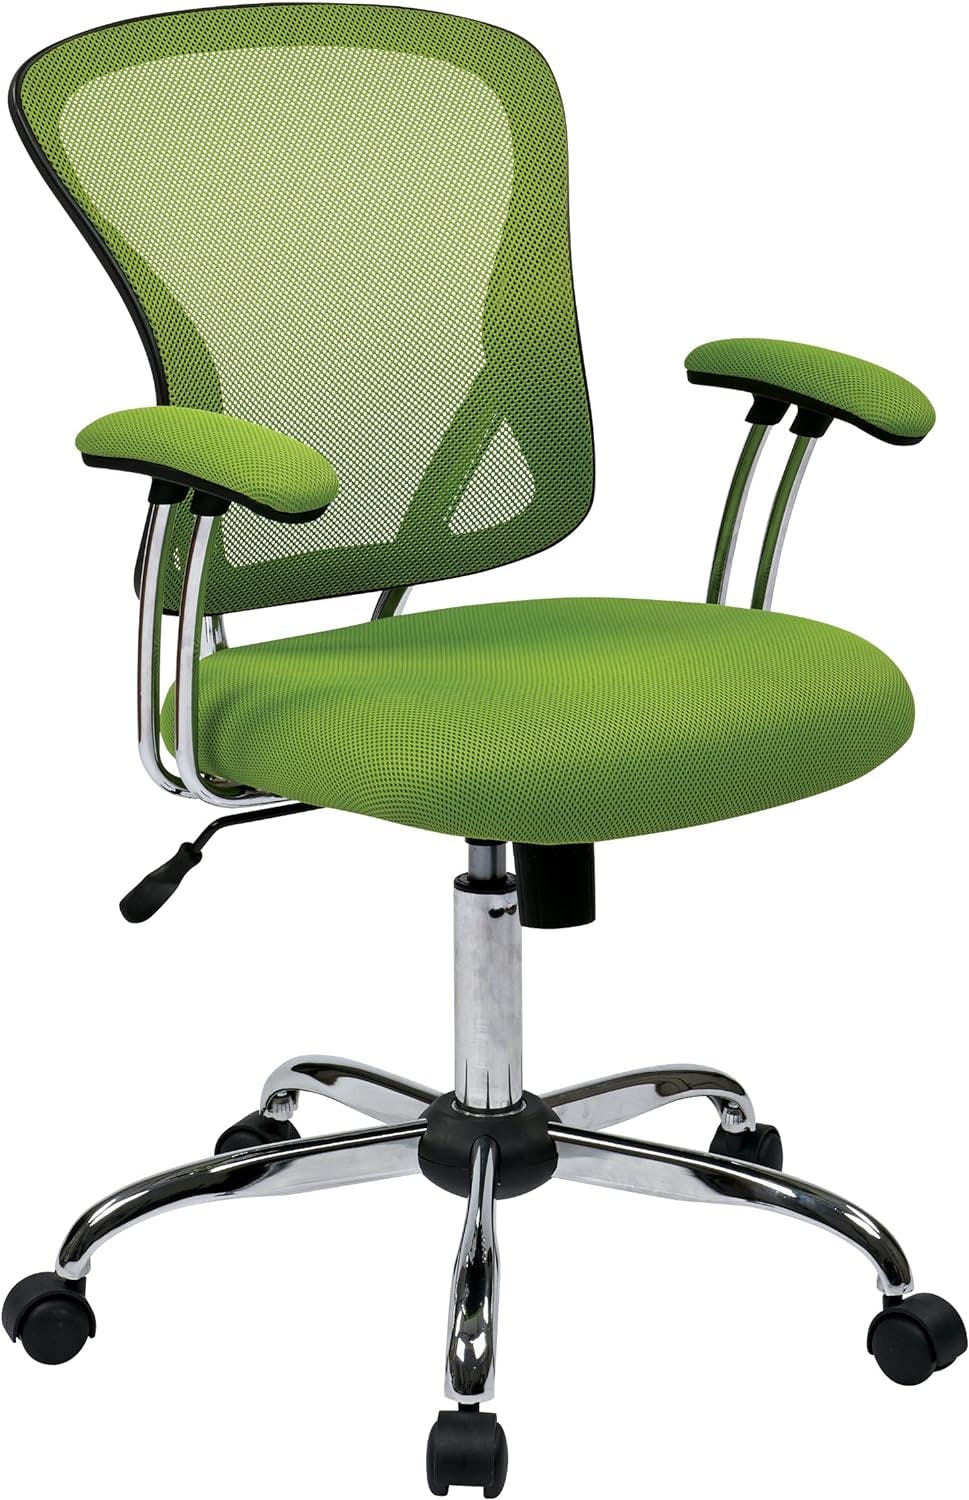 Energize Swivel Green Mesh and Leather Task Chair with Metal Accents